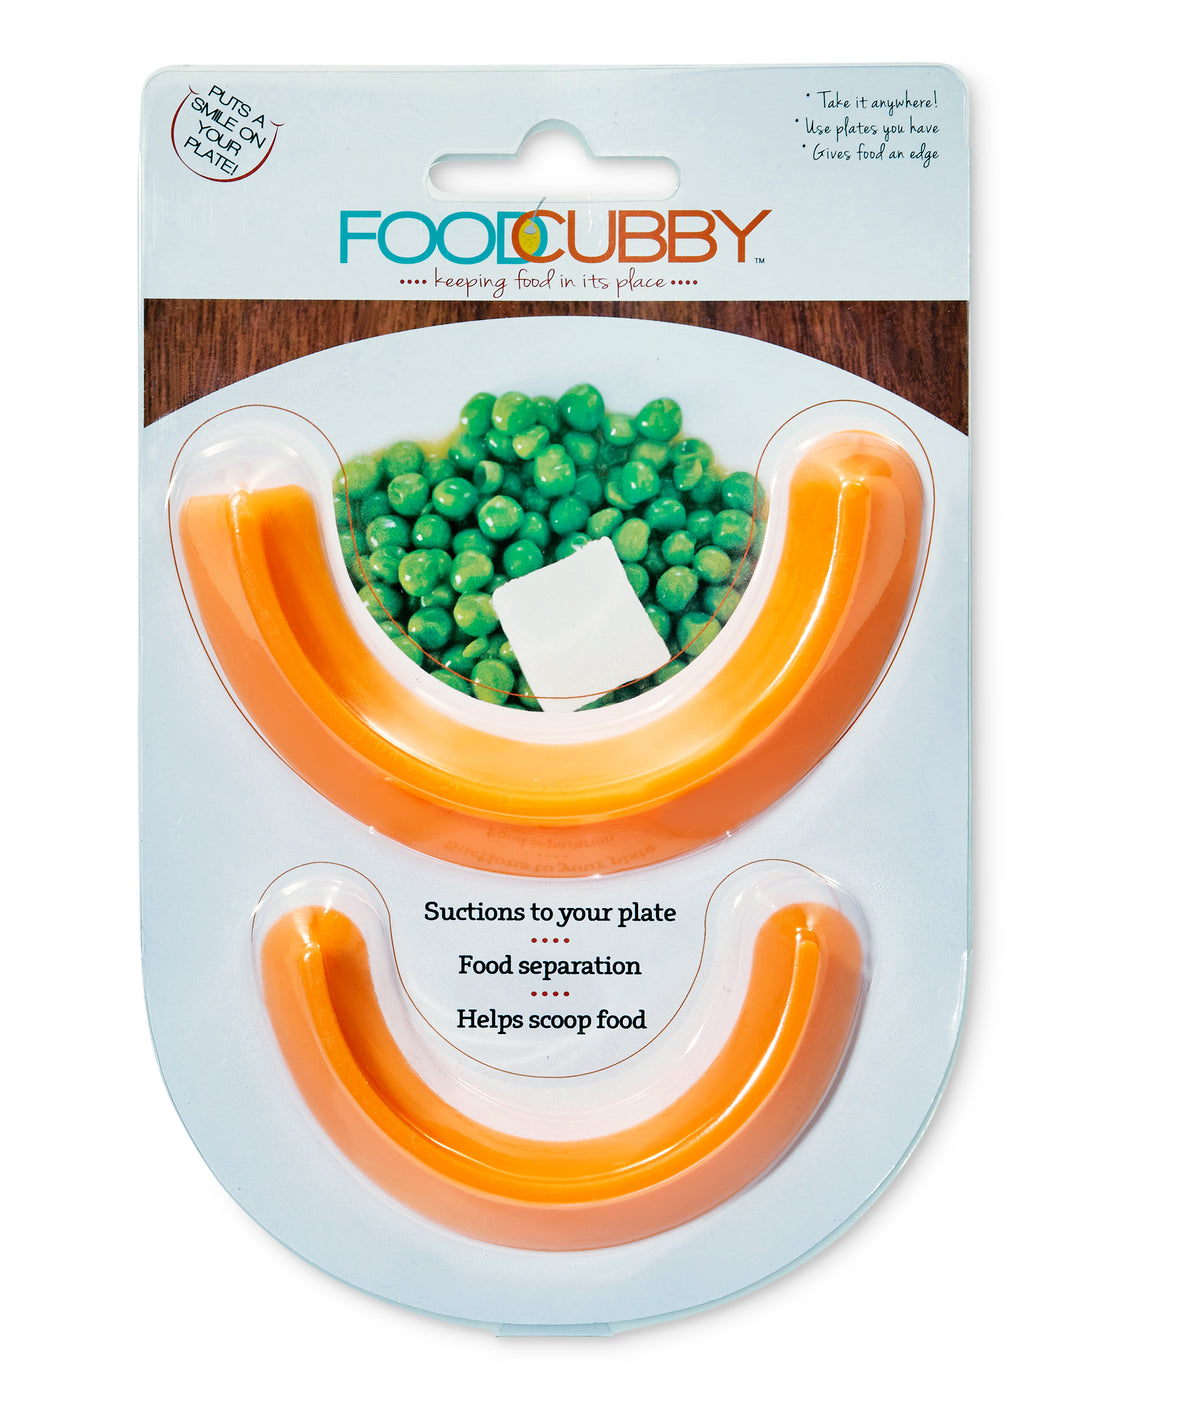 This Food Cubby For Picky Eaters Separates The Different Foods On